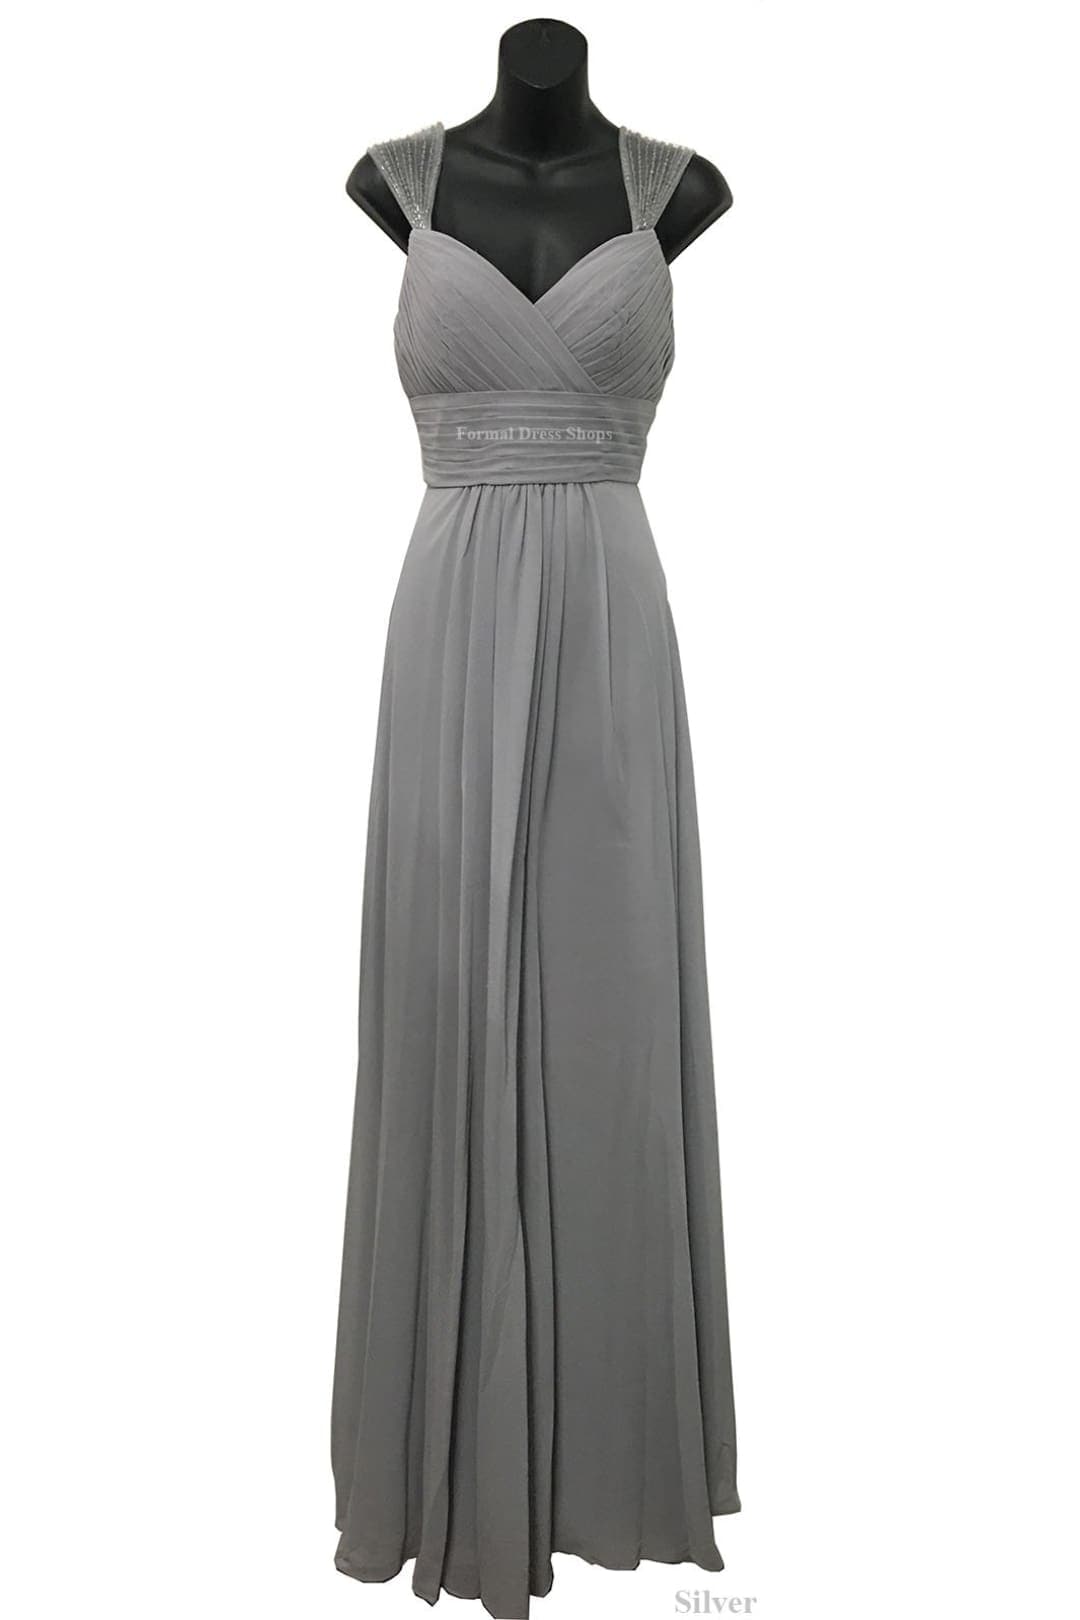 Classy Long Evening Gown - Silver / 6